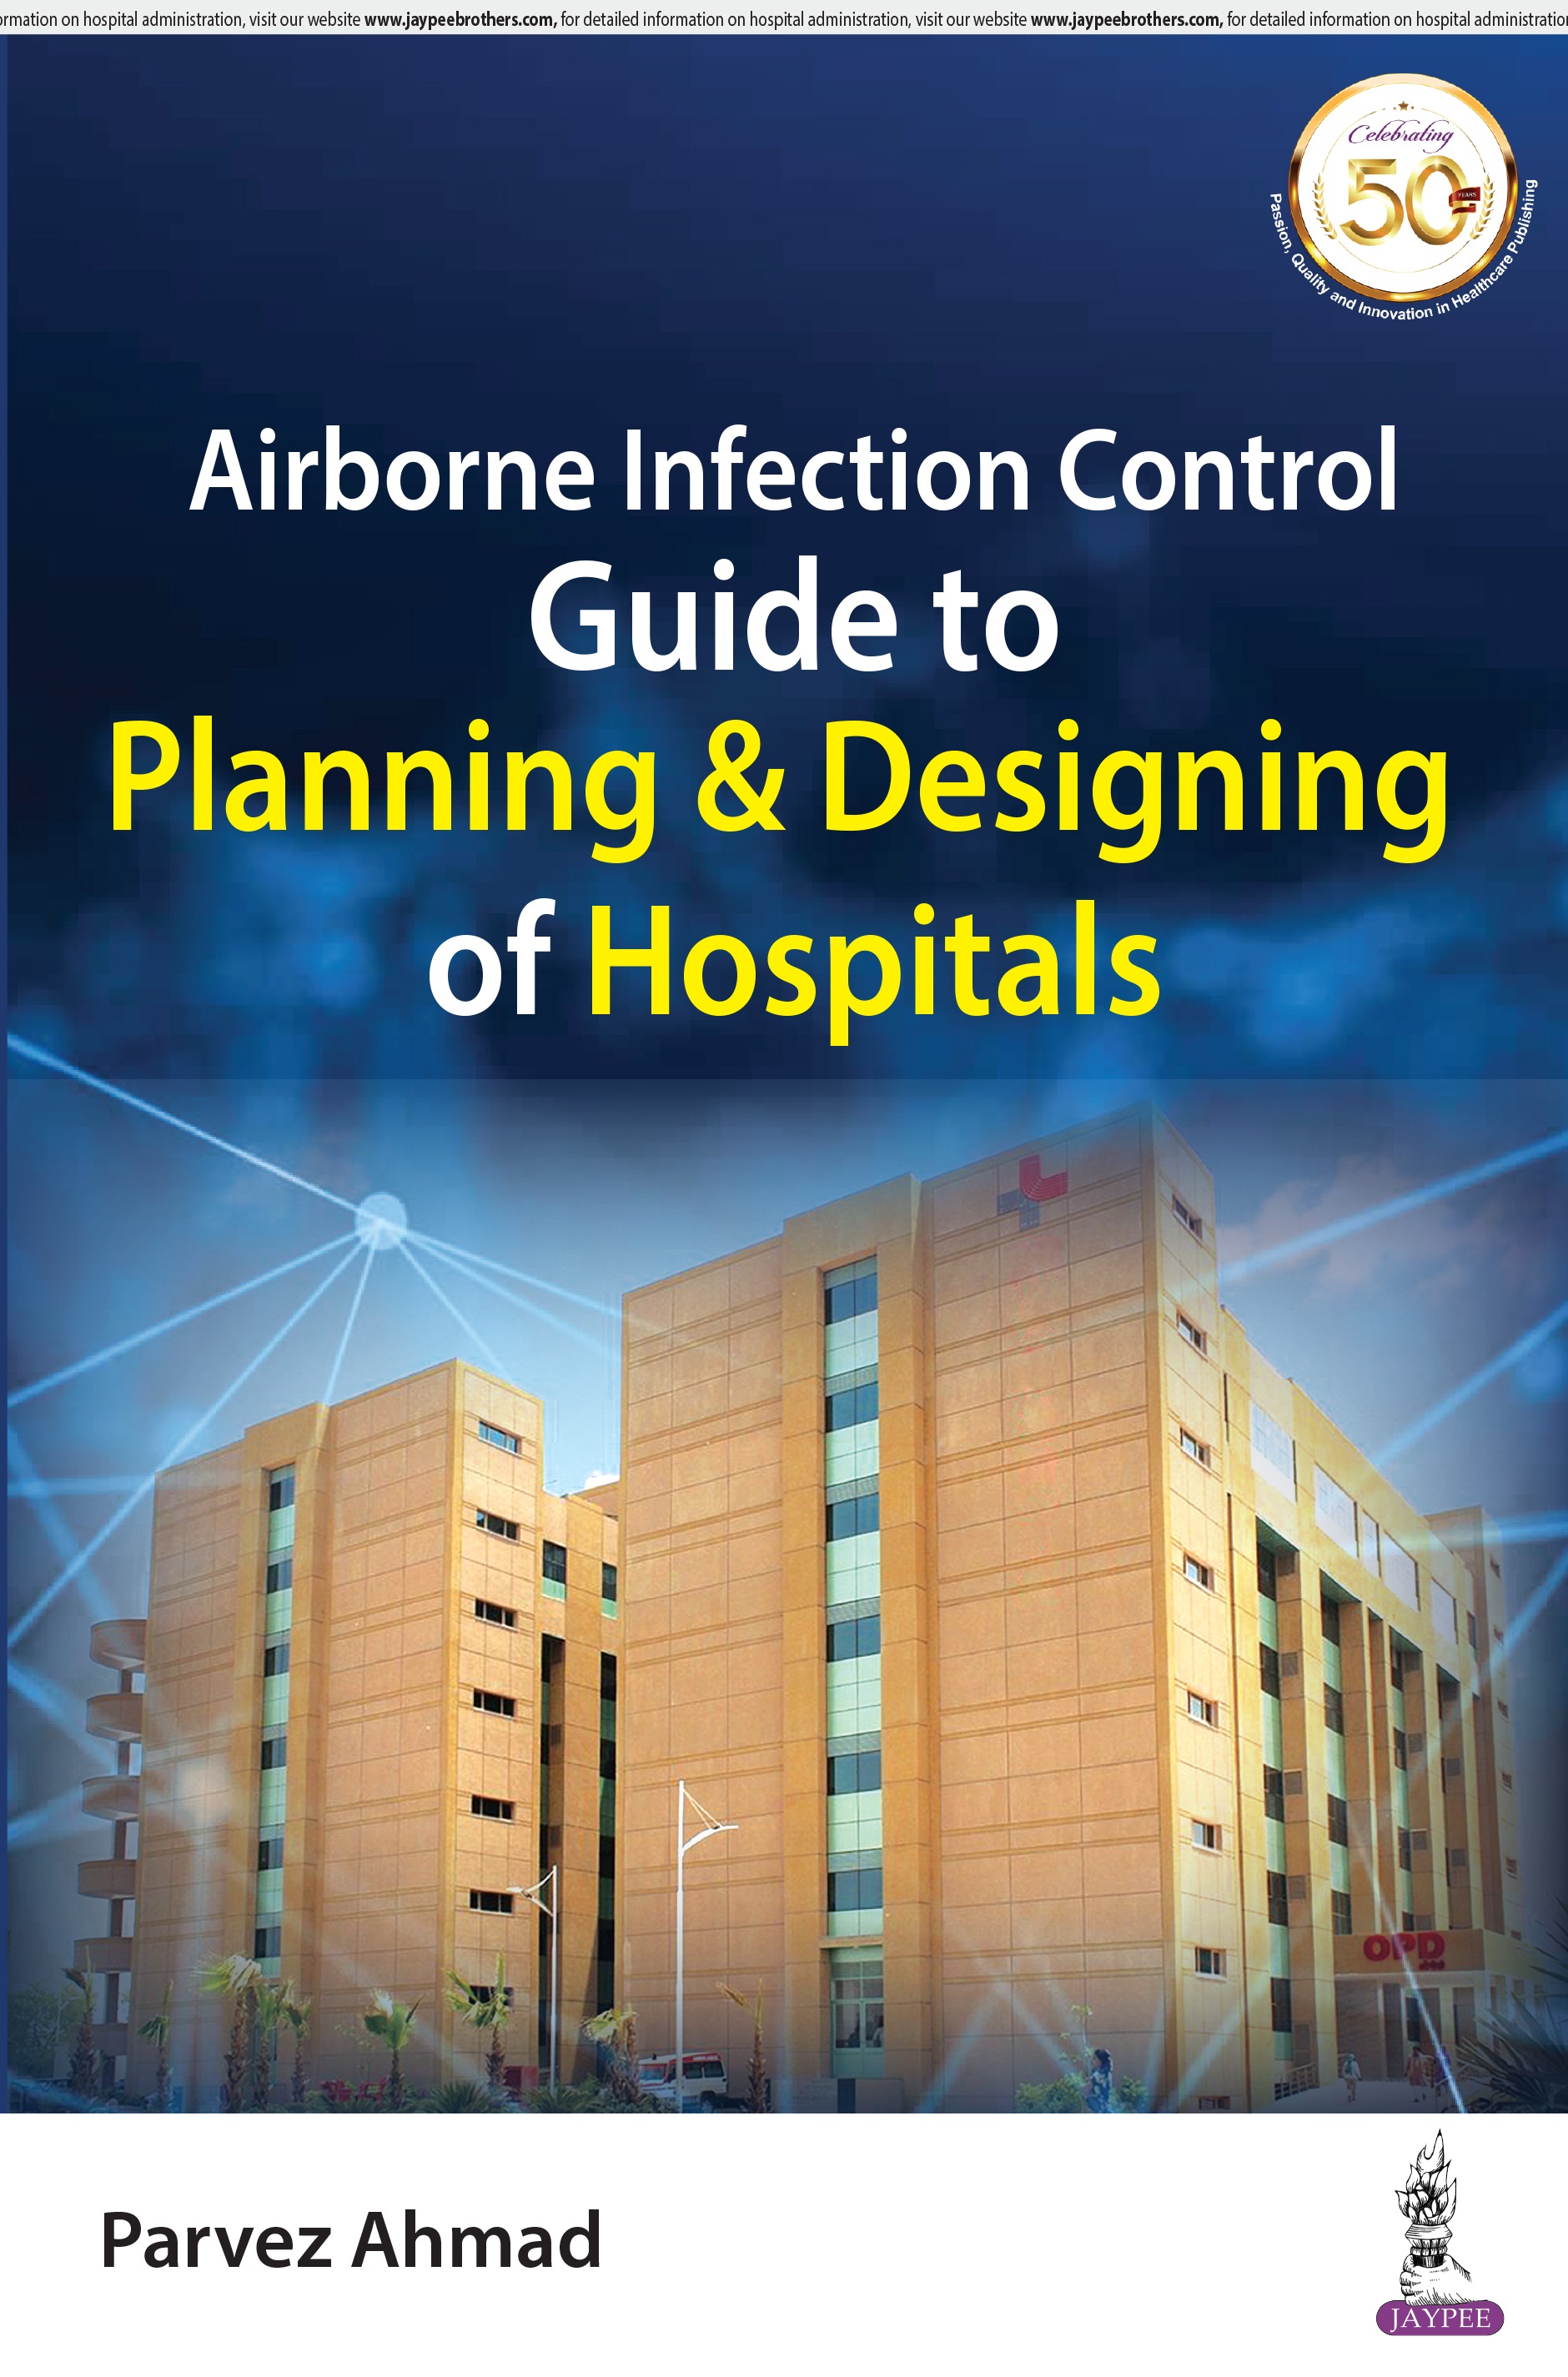 Airborne Infection Control Guide To Planning & Designing Of Hospitals